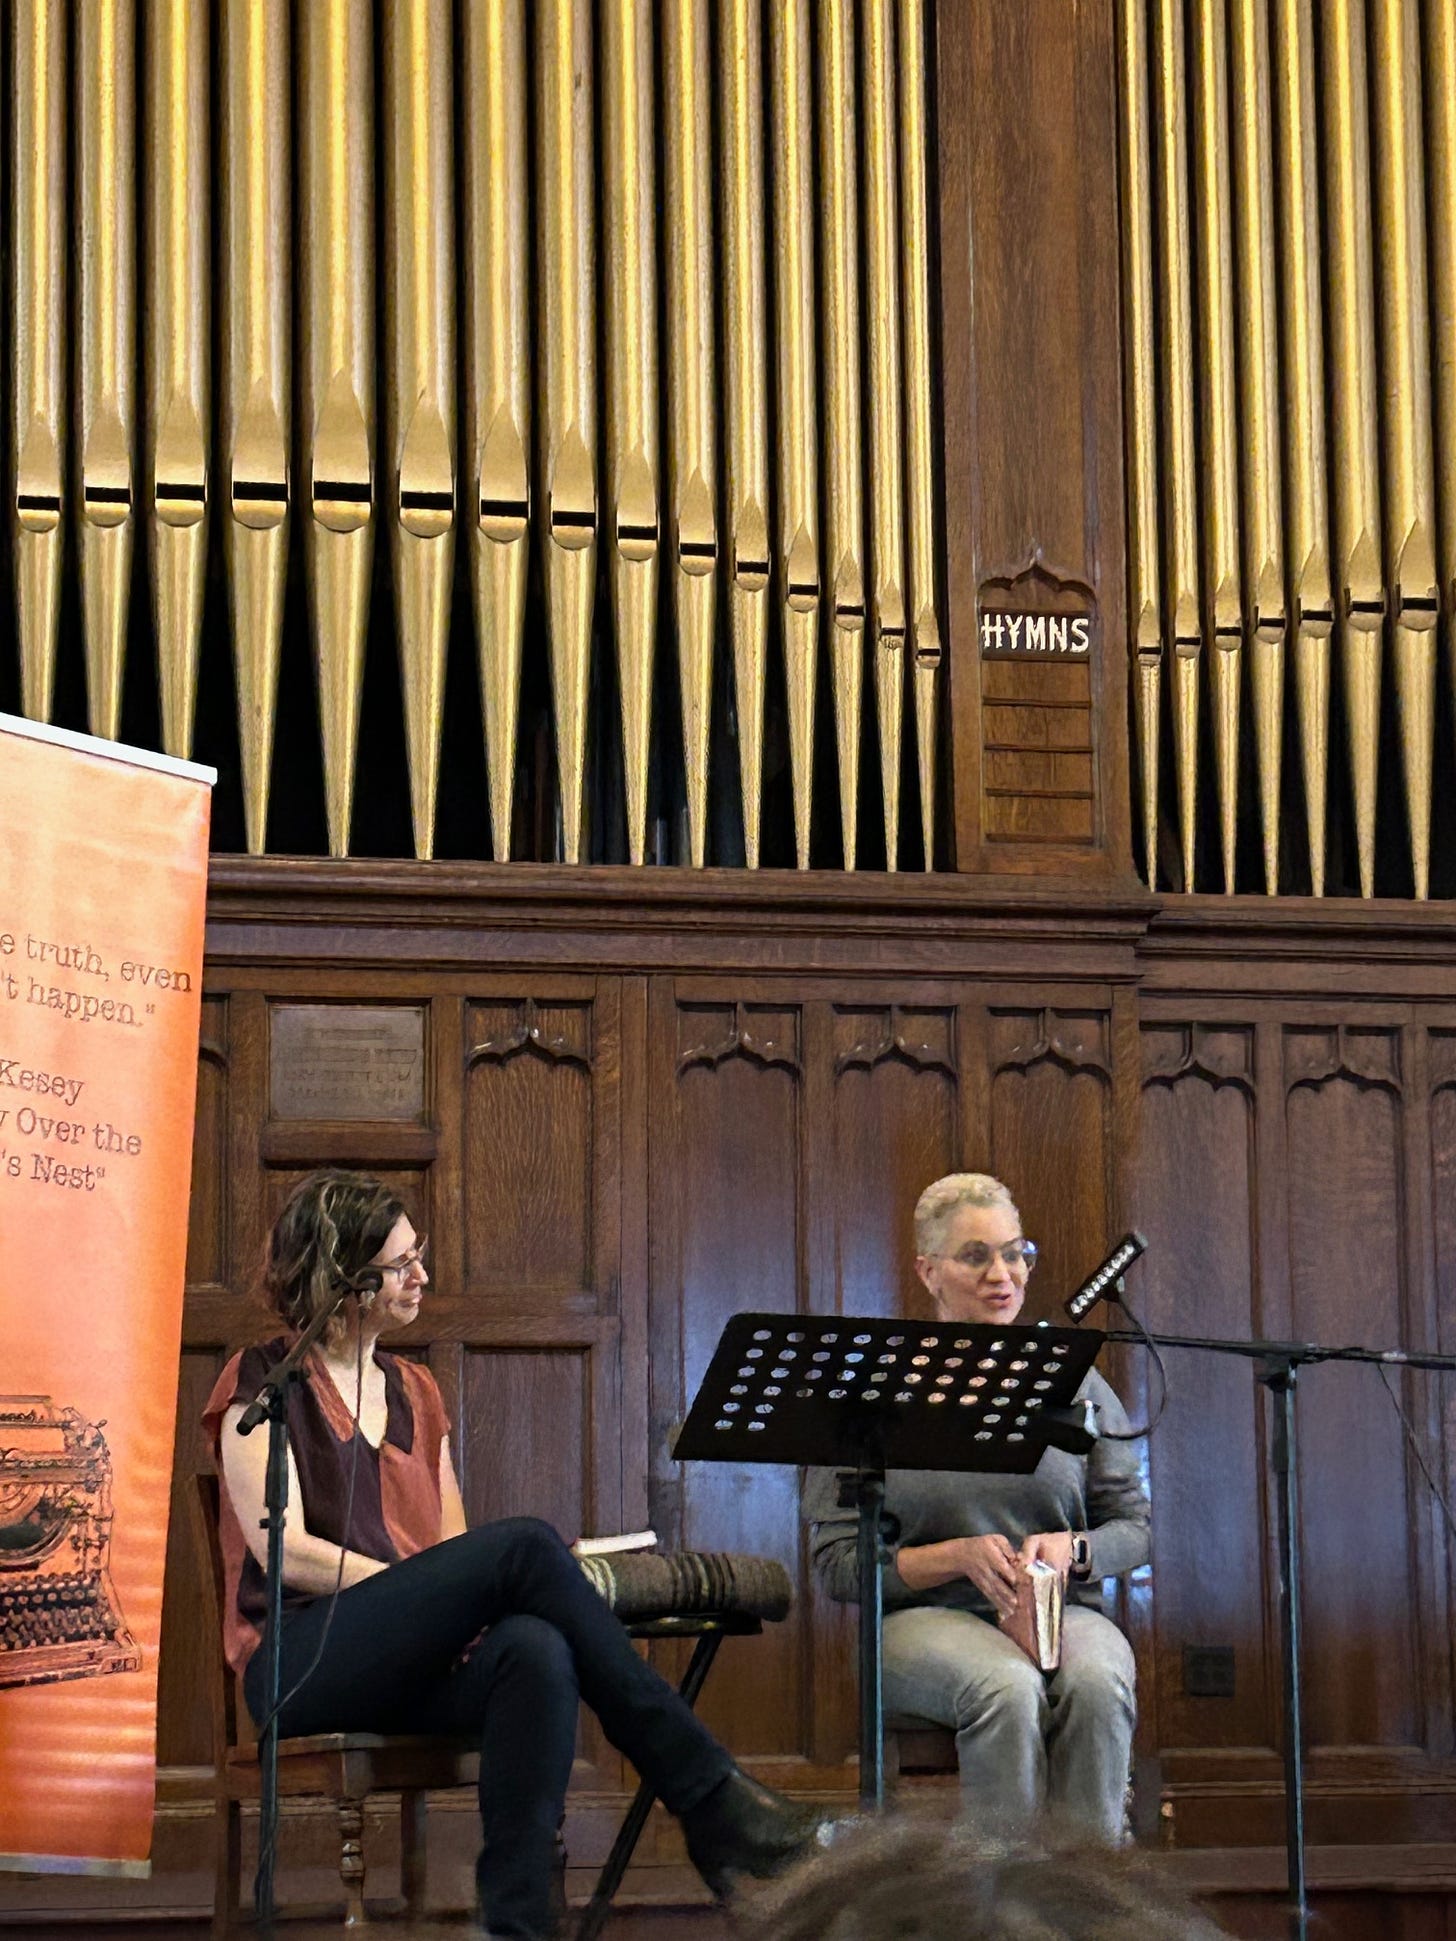 Image shows author Idra Novey and author Asale Angel-Ajani discussing their books on a church stage beneath organ pipes